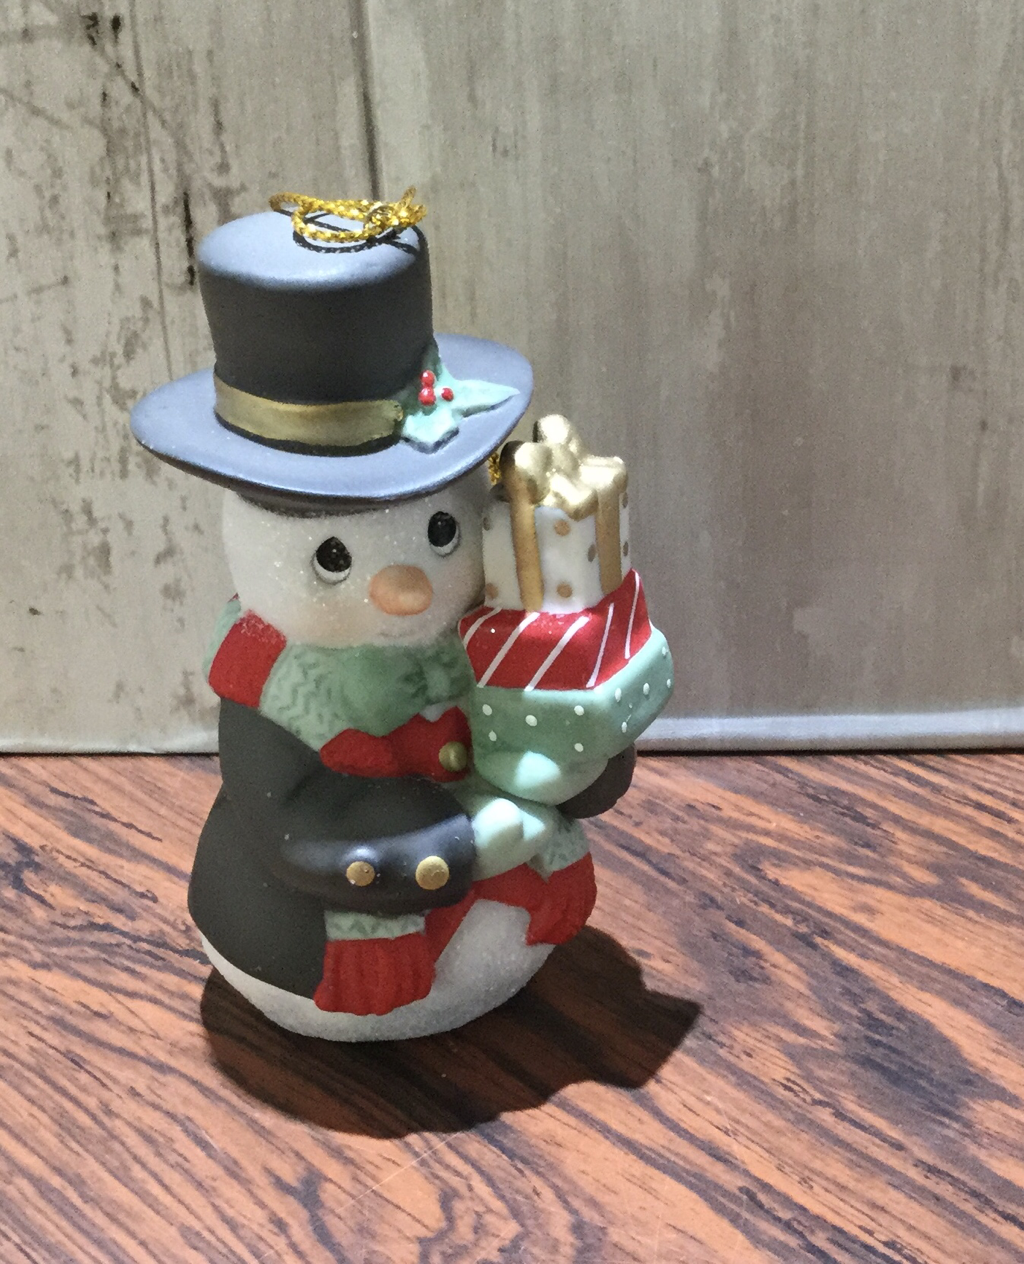 Precious Moments Snowman with Violin Figurine Evening Rehearsal Second in Series